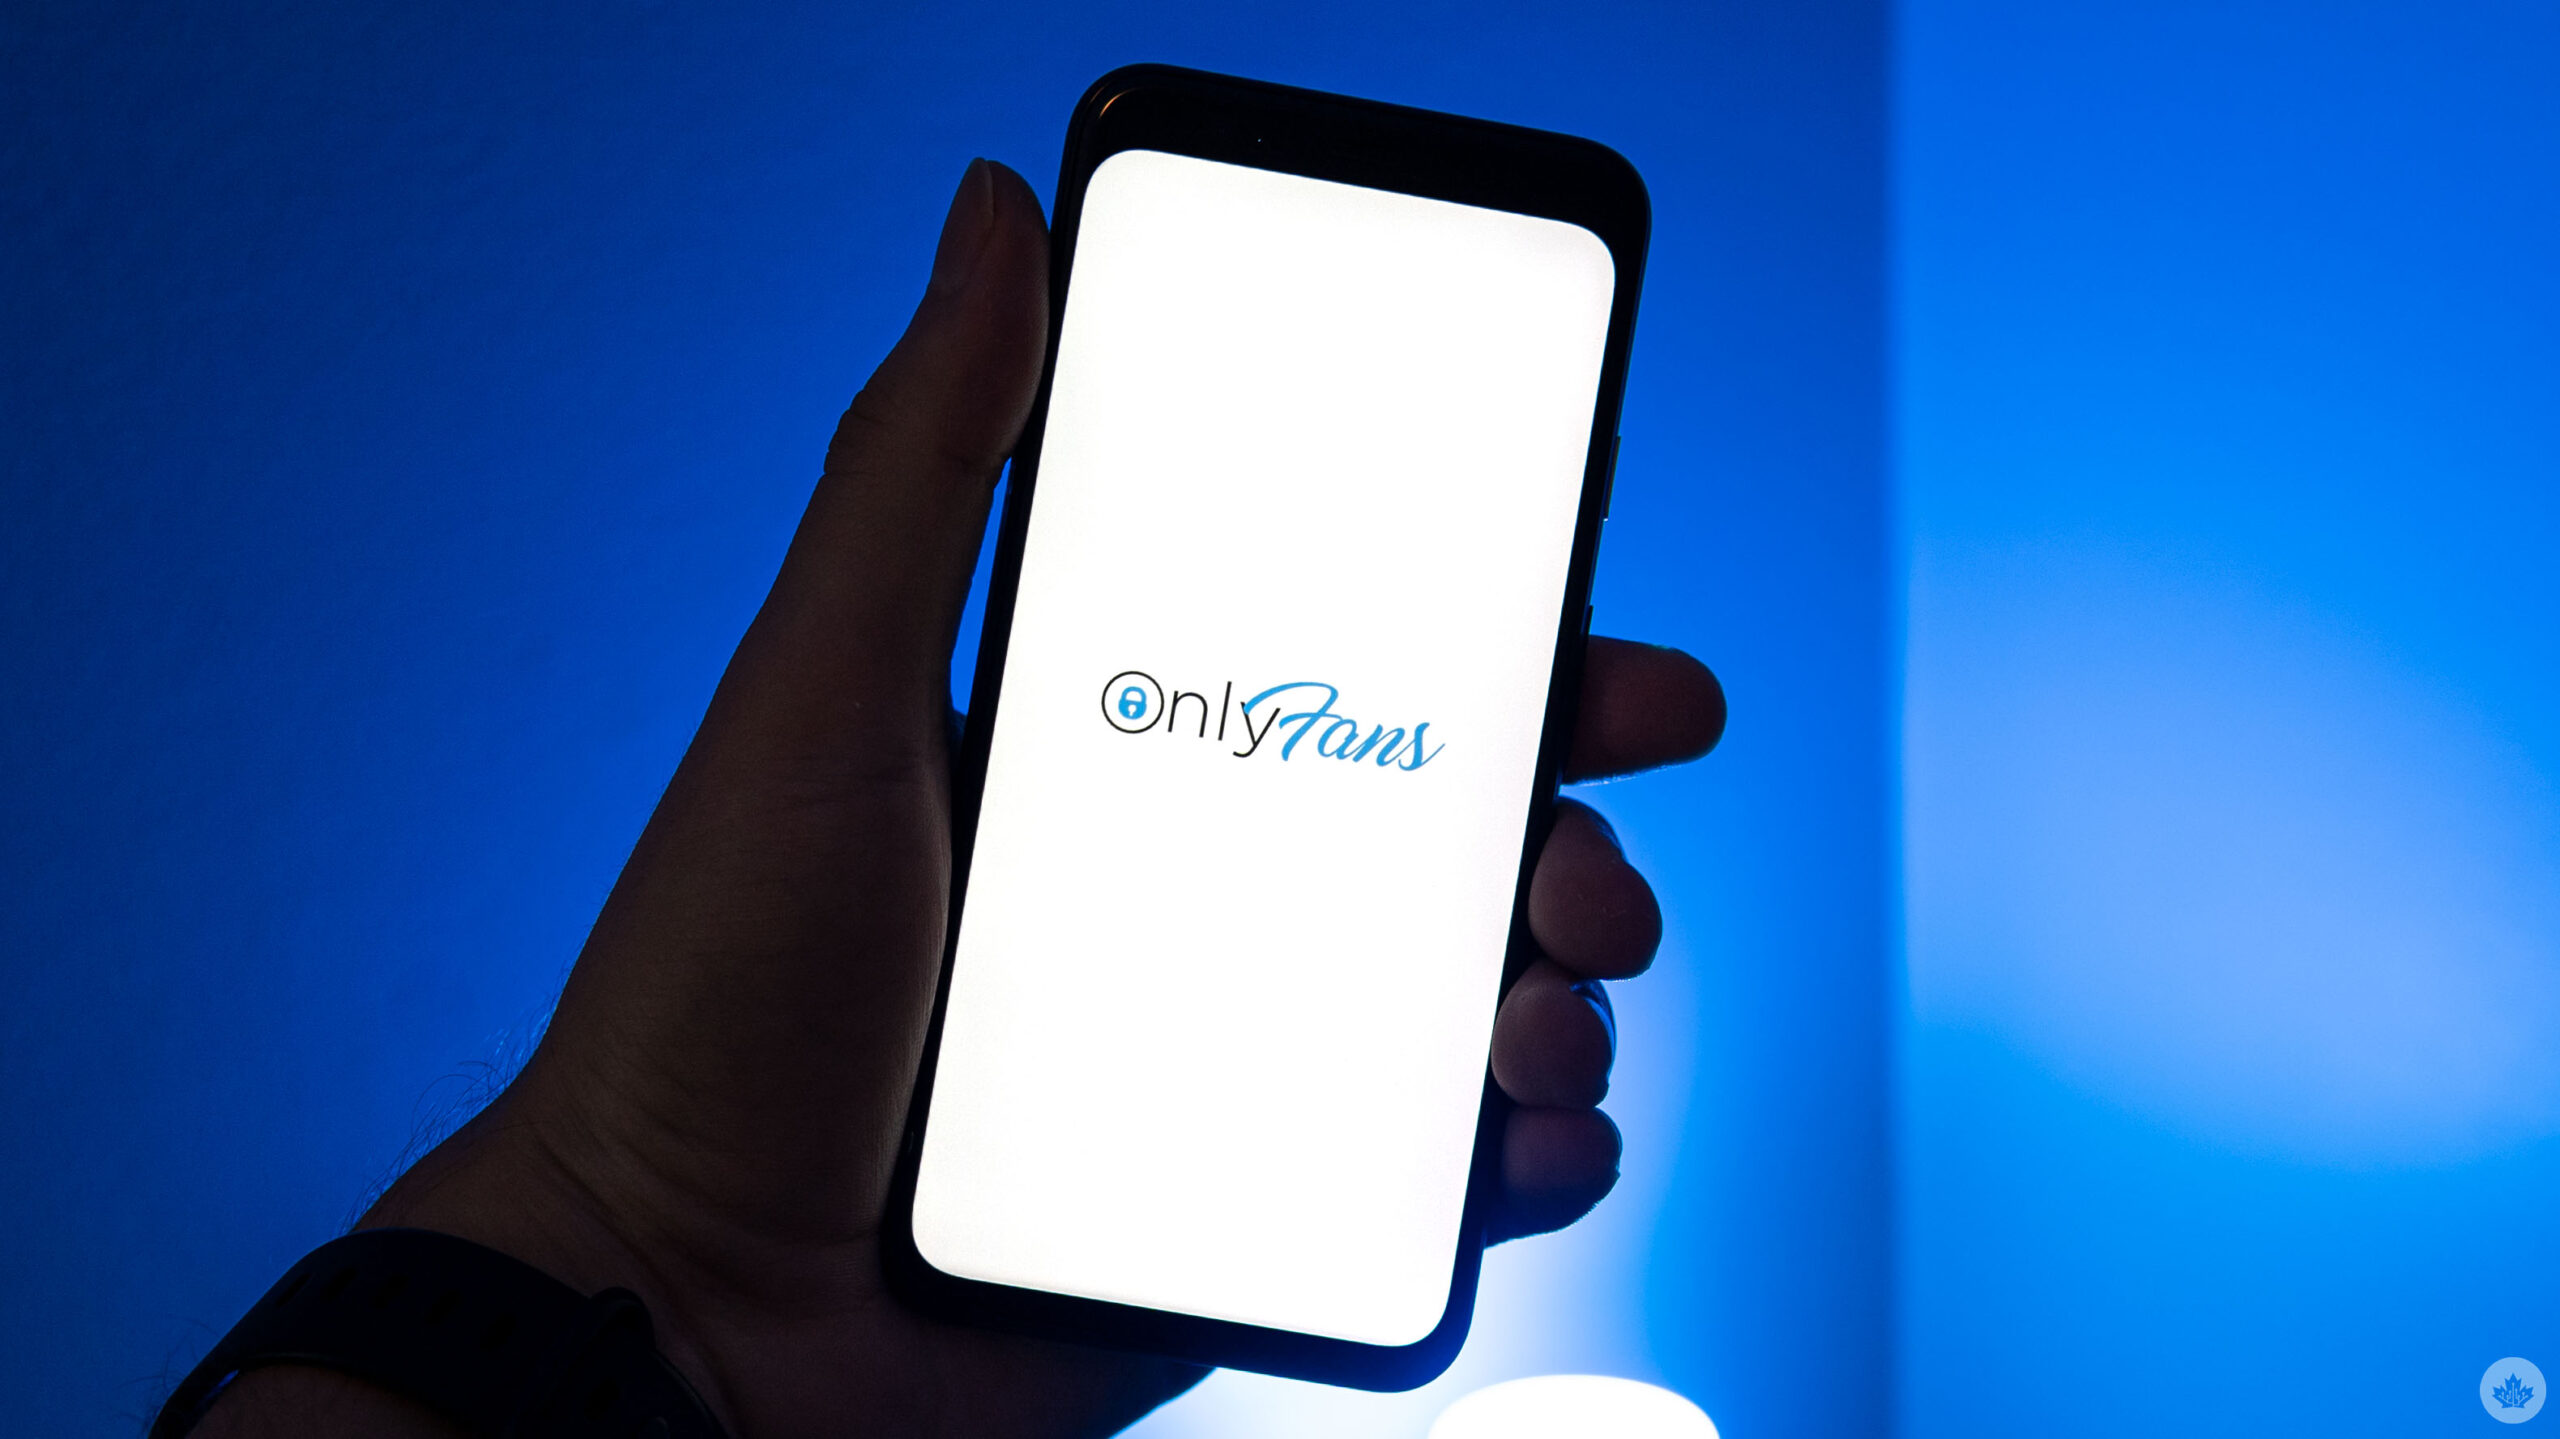 OnlyFans logo on a smartphone.